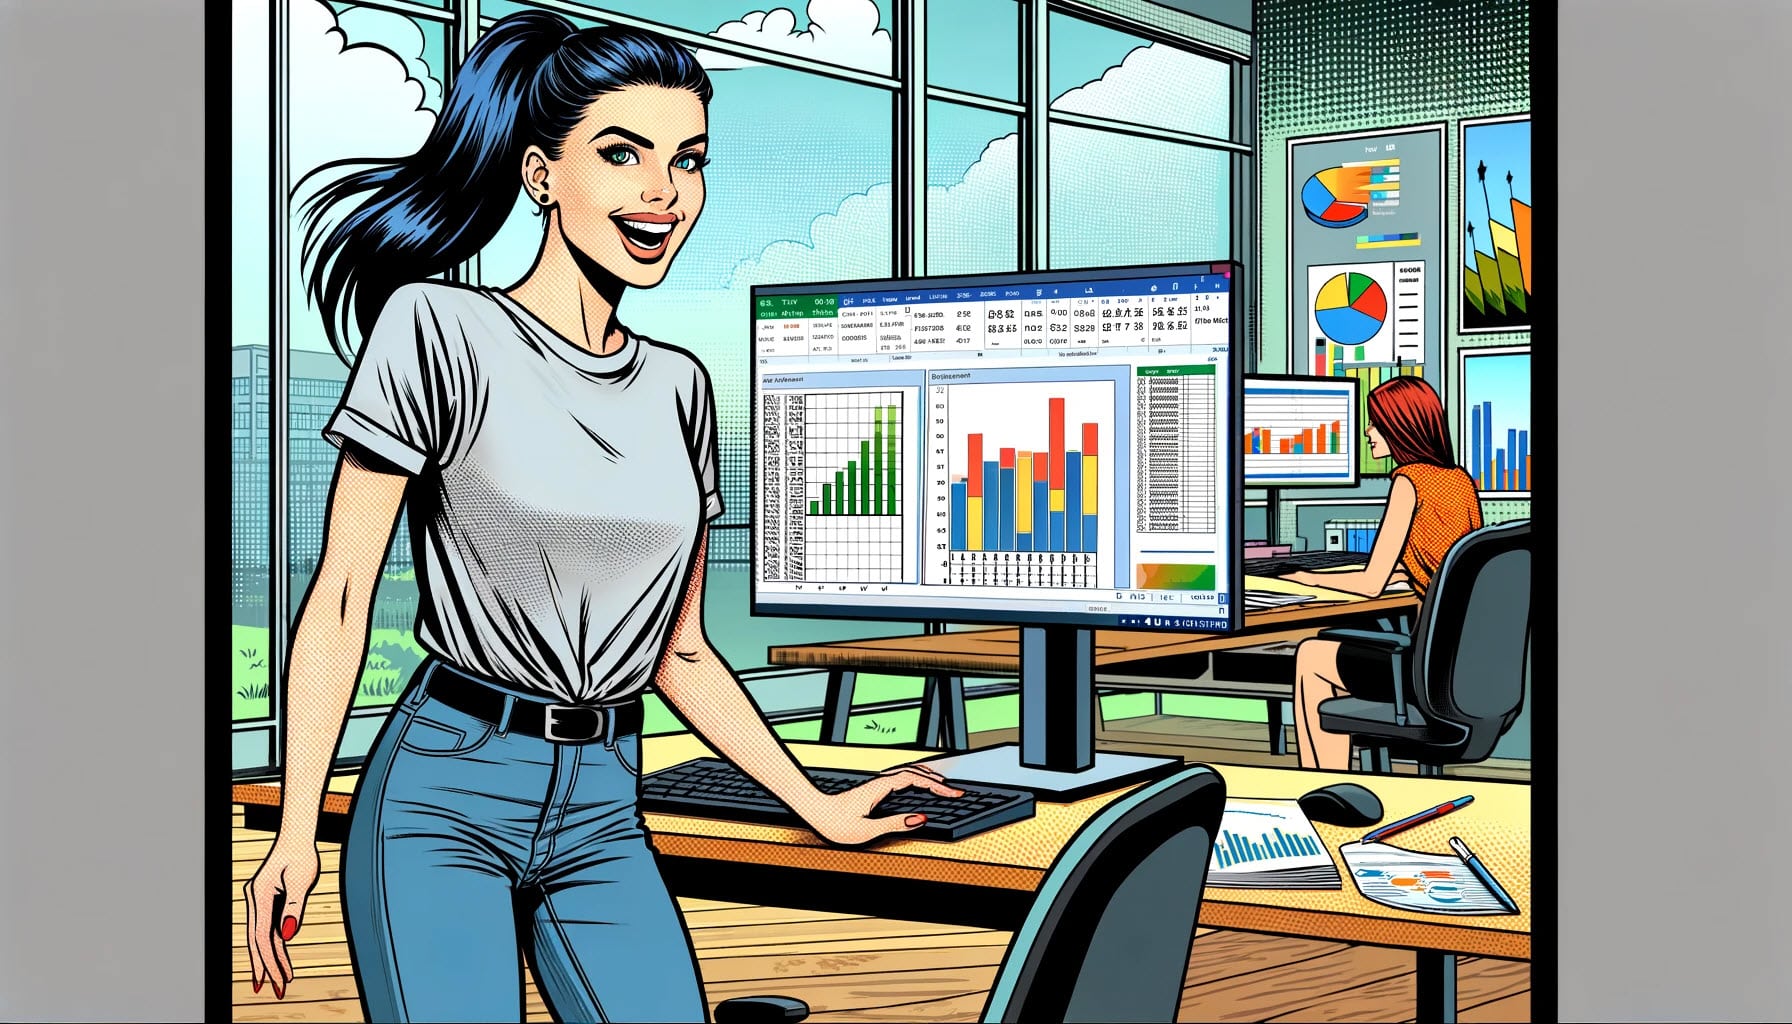 image depicts a young woman dressed in a t-shirt and jeans, in a modern office, with her hair in a ponytail. She looks happy and is engaged with Excel on her computer screen, which displays graphs and charts. The contemporary office environment is vibrant, captured in bright colors that create a dynamic and positive atmosphere. The image captures her satisfaction with working on Excel, highlighting her proficiency in data handling and visualization through graphs and charts, all presented in the same playful yet sophisticated comic book style